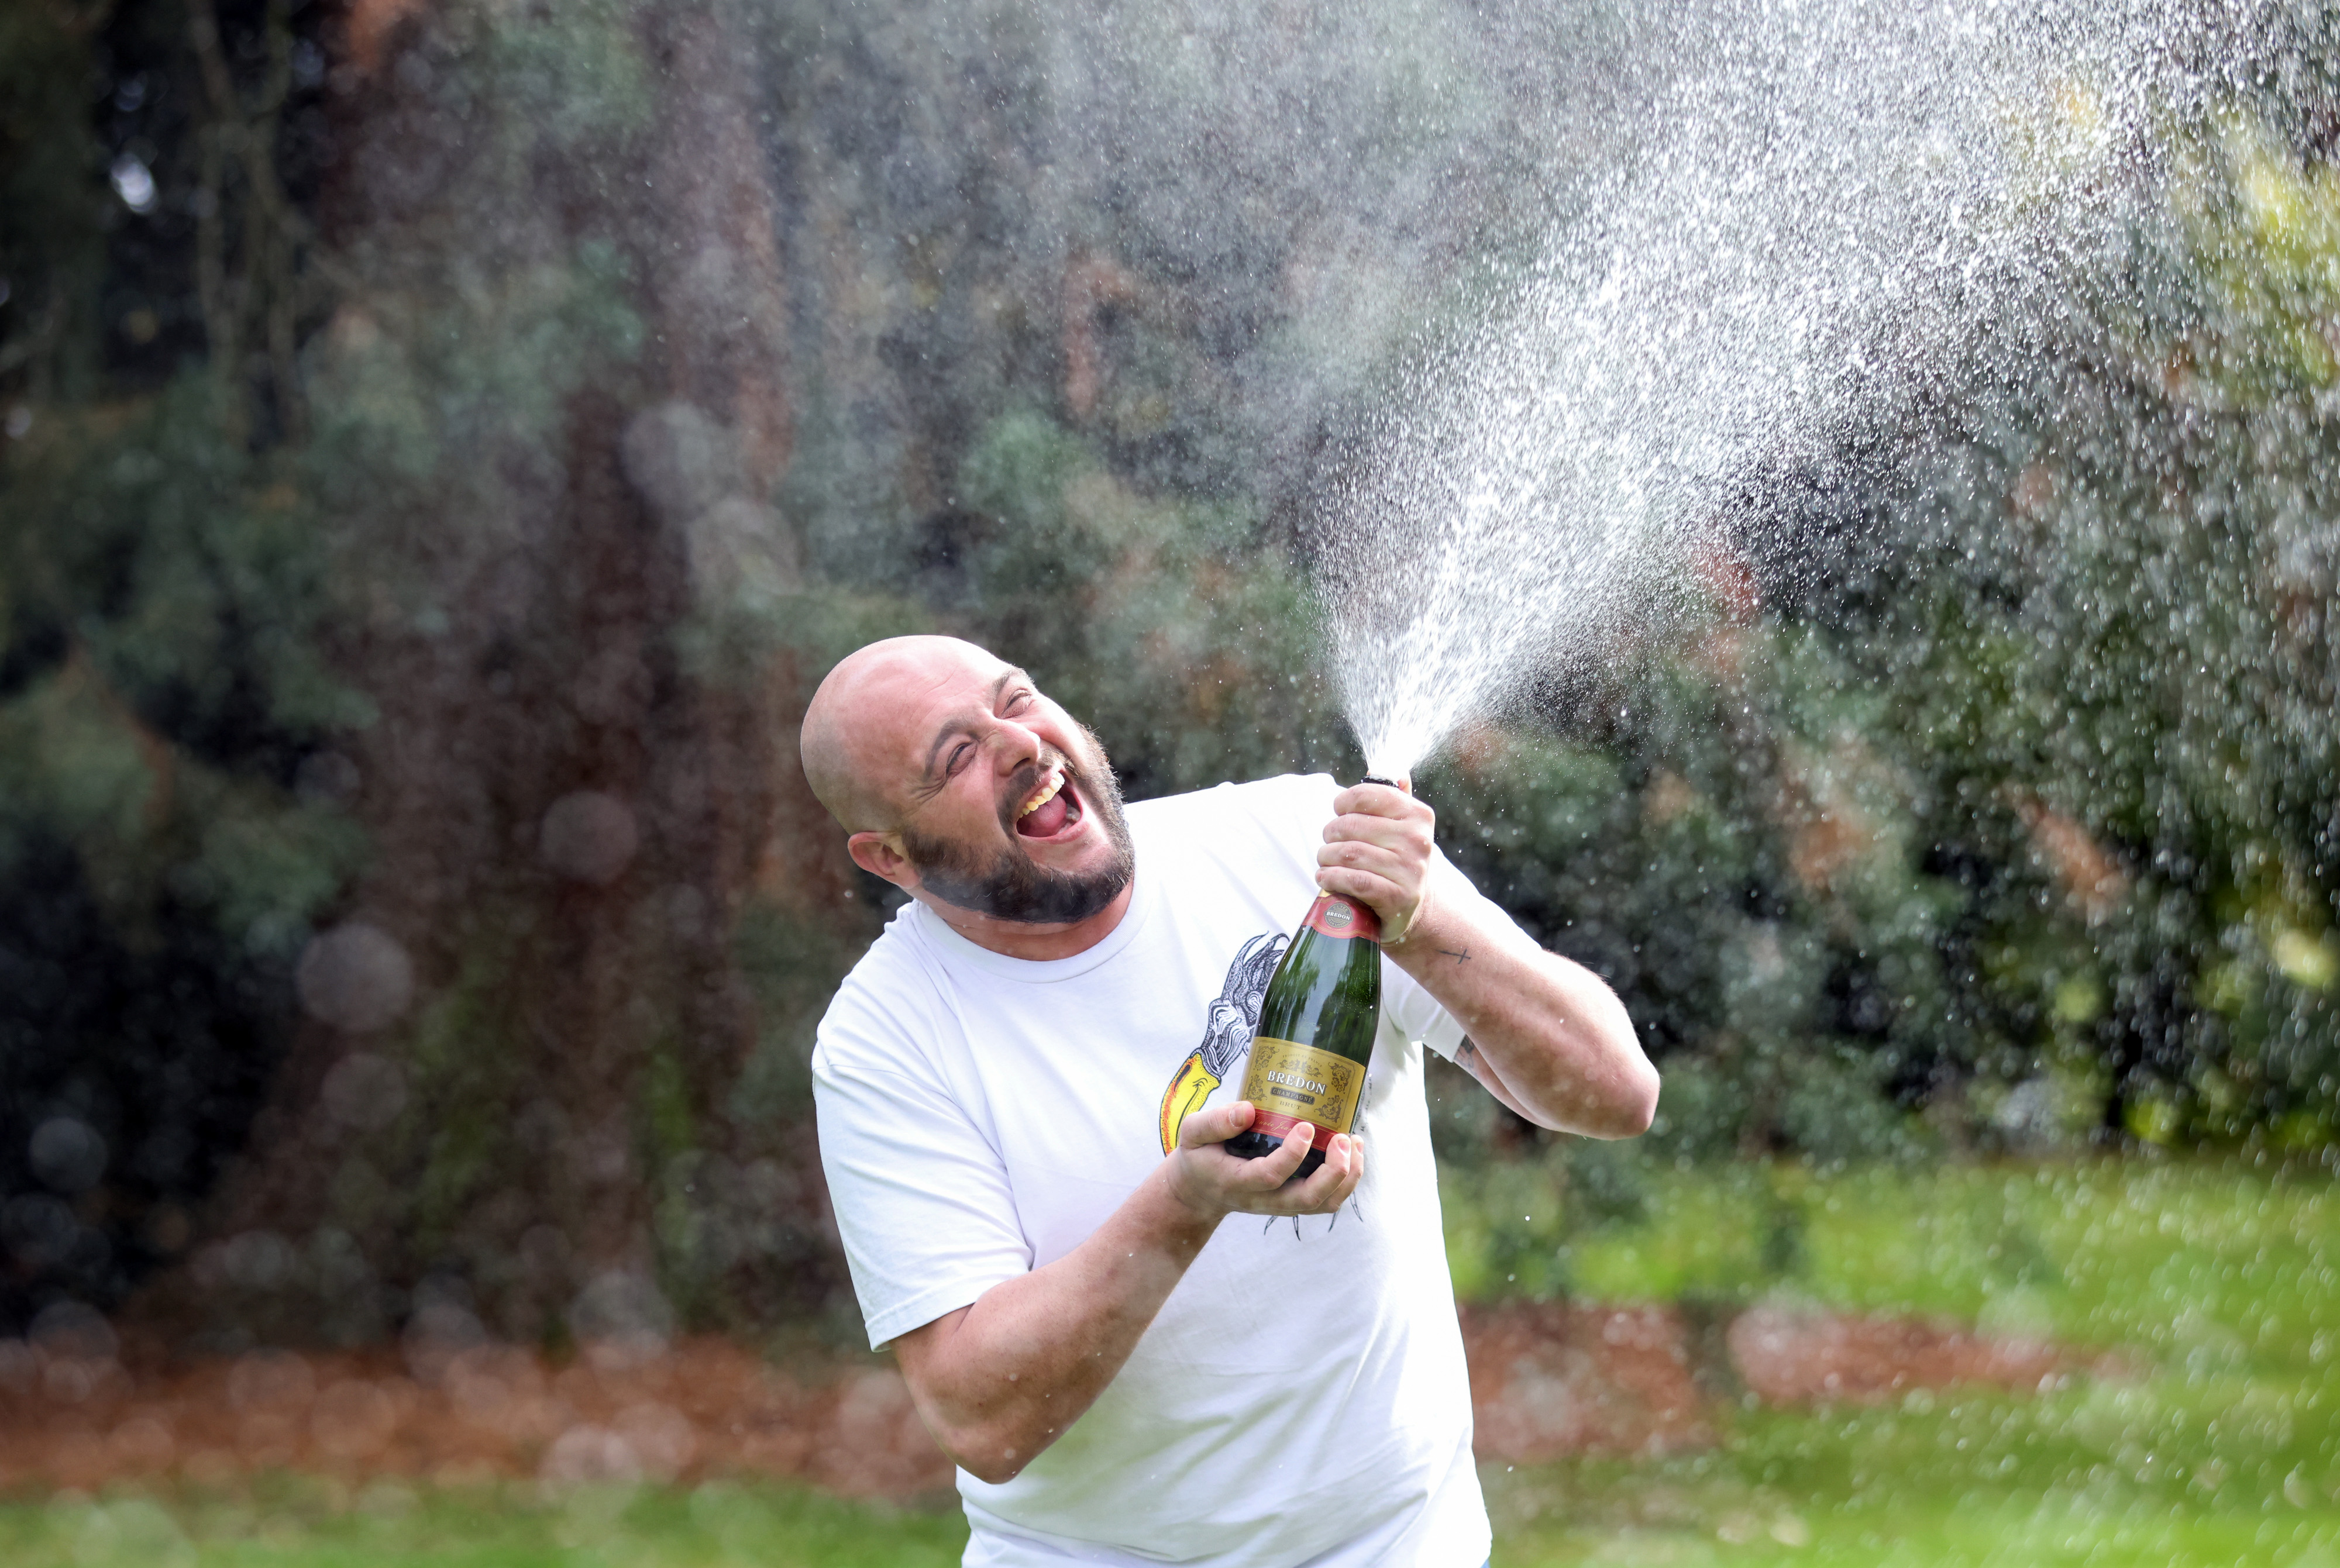 Plumber Sean Irwin bought his winning scratch card at a newsagents in Brentwood in Essex. (National Lottery/ PA)